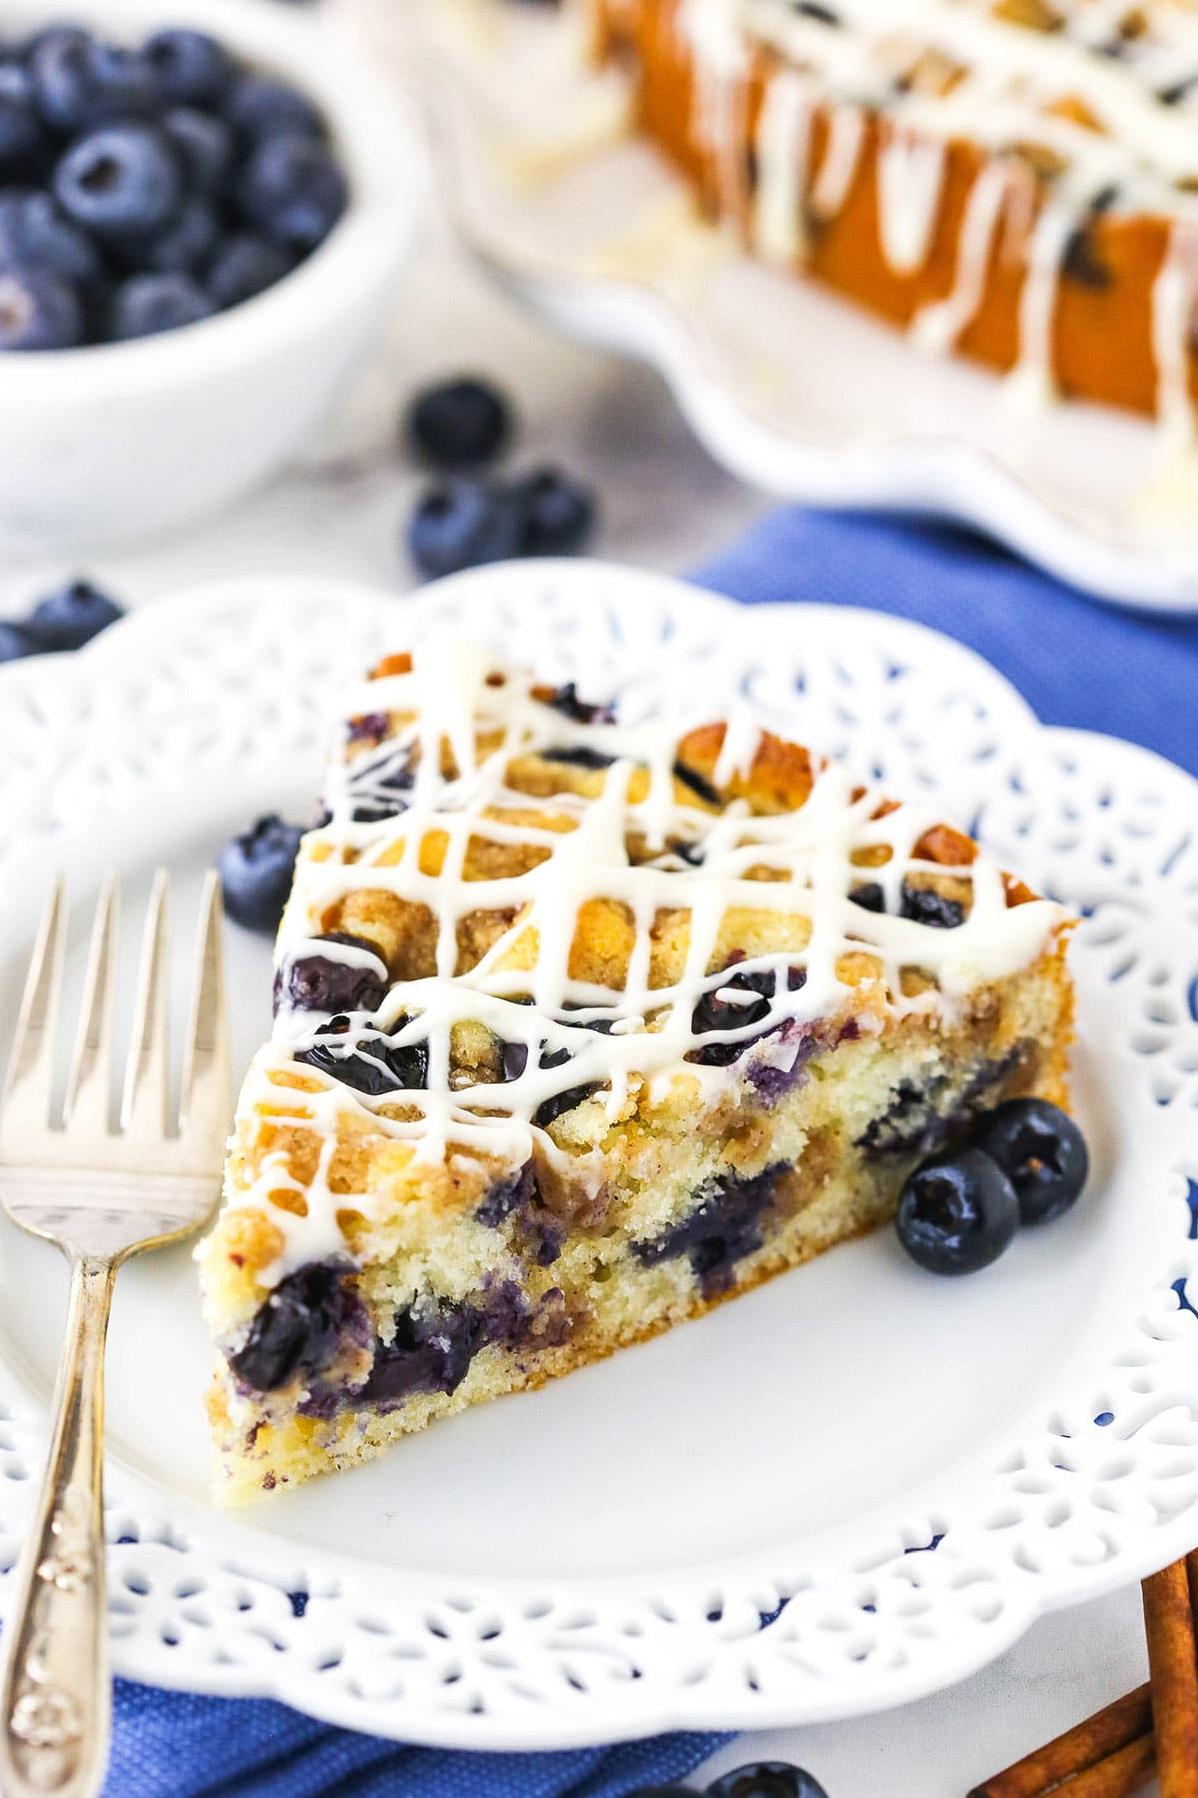  A masterpiece of flavors - Blueberry Cinnamon Coffee Cake